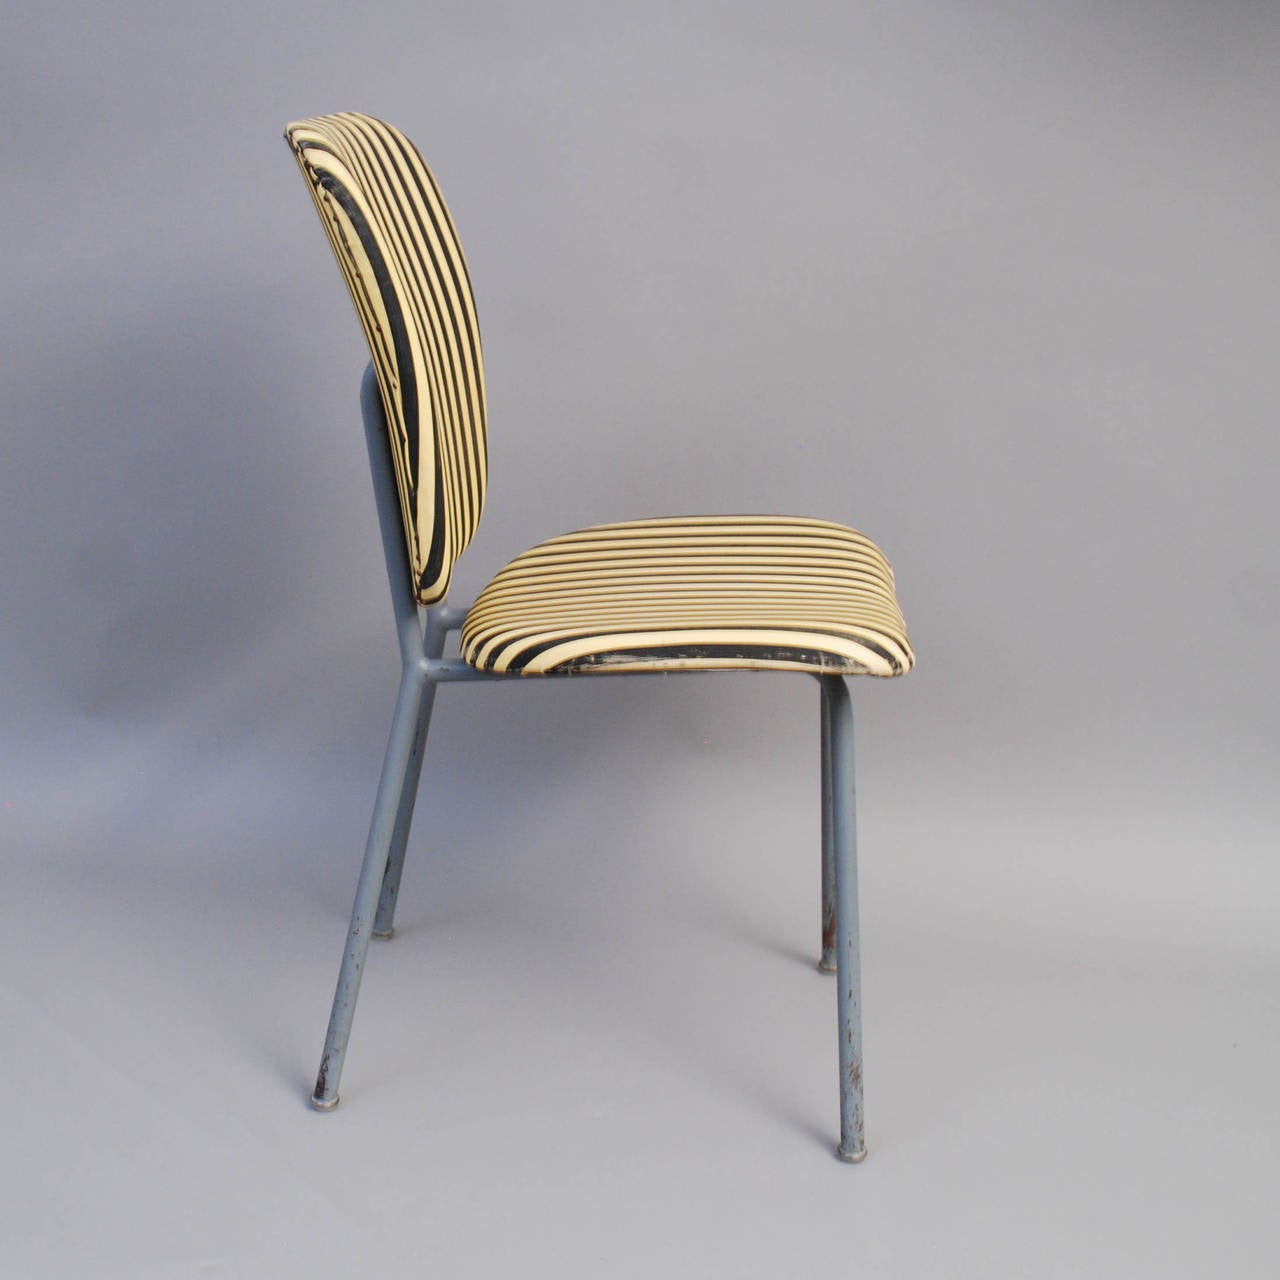 An industrial chair by Verkstads Aktiebolaget Lindqvist, Motala Sweden. 1940-50s.
 Greypainted metalframe and yellow/black striped vinyl upholstry.